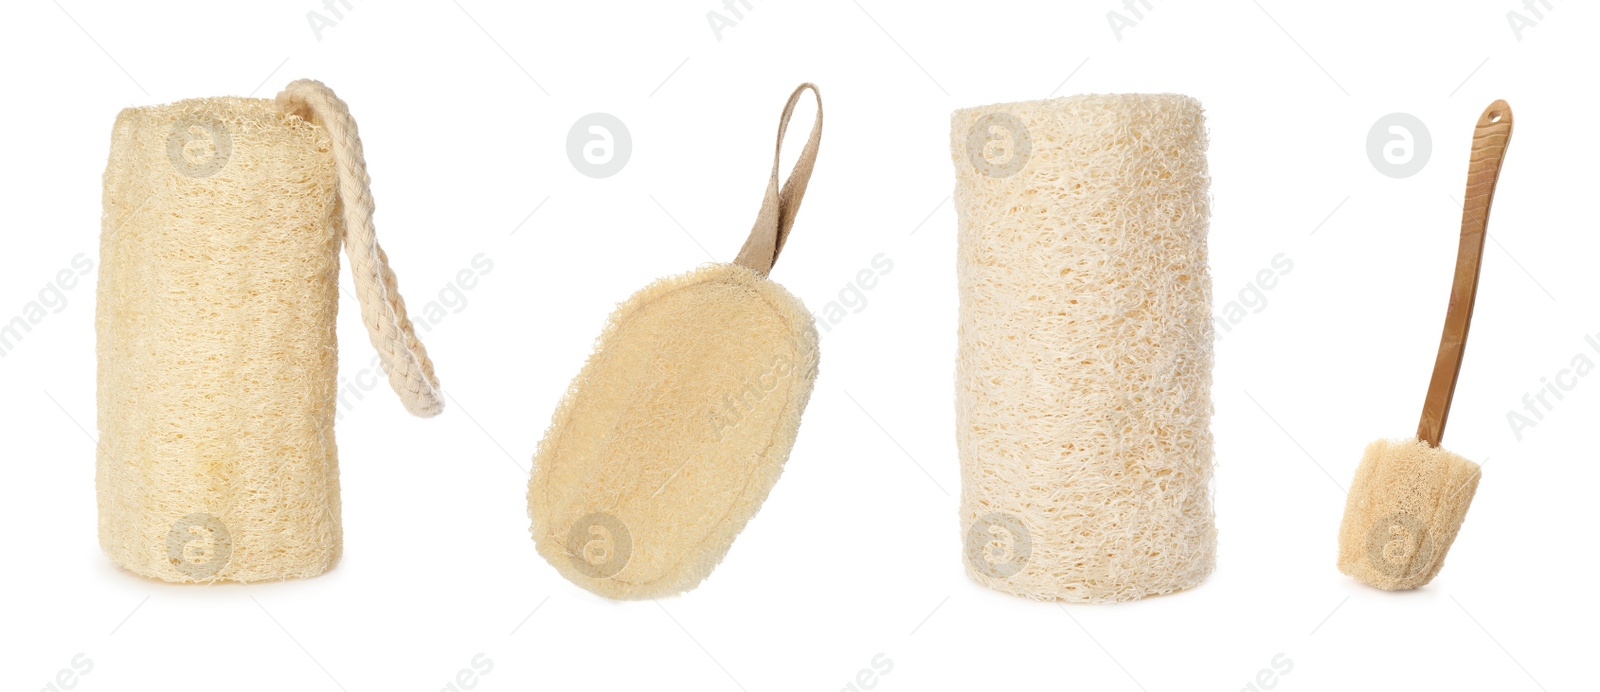 Image of Set with natural shower loofah sponges and brush on white background. Banner design